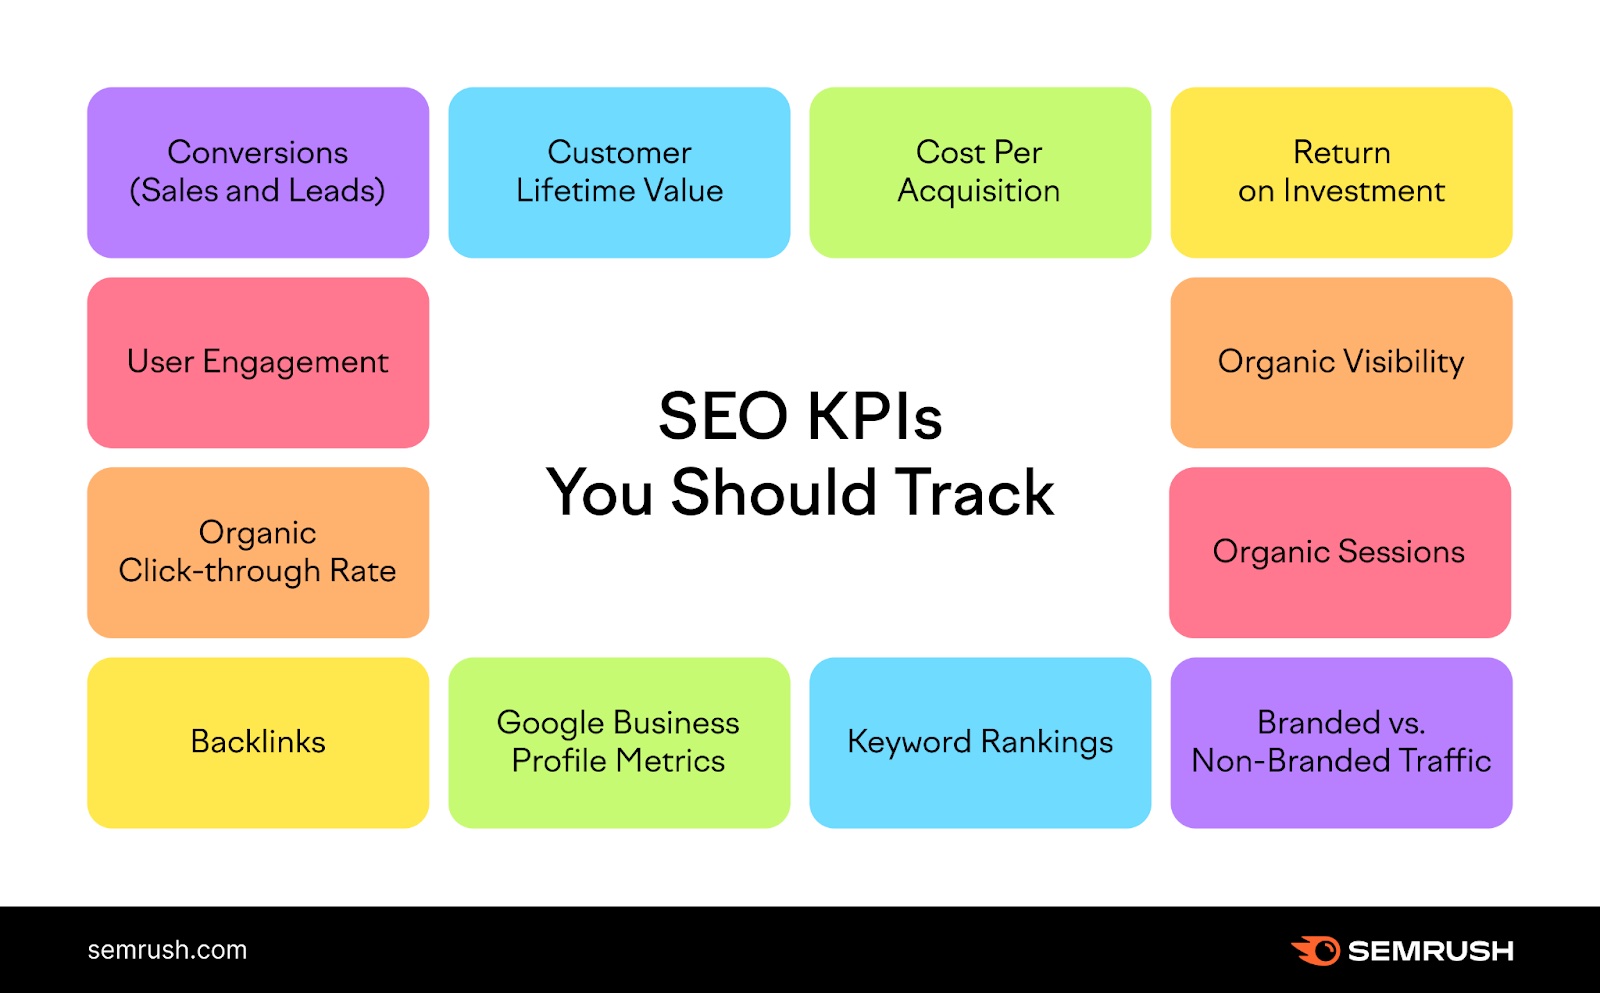 SEO KPIs you should track: conversions, customer lifetime value, cost per acquisition, return on investment, organic visibility, organic sessions, brand vs non-brand traffic, keyword rankings, google business profile metrics, backlinks, organic click-through rate, and user engagement